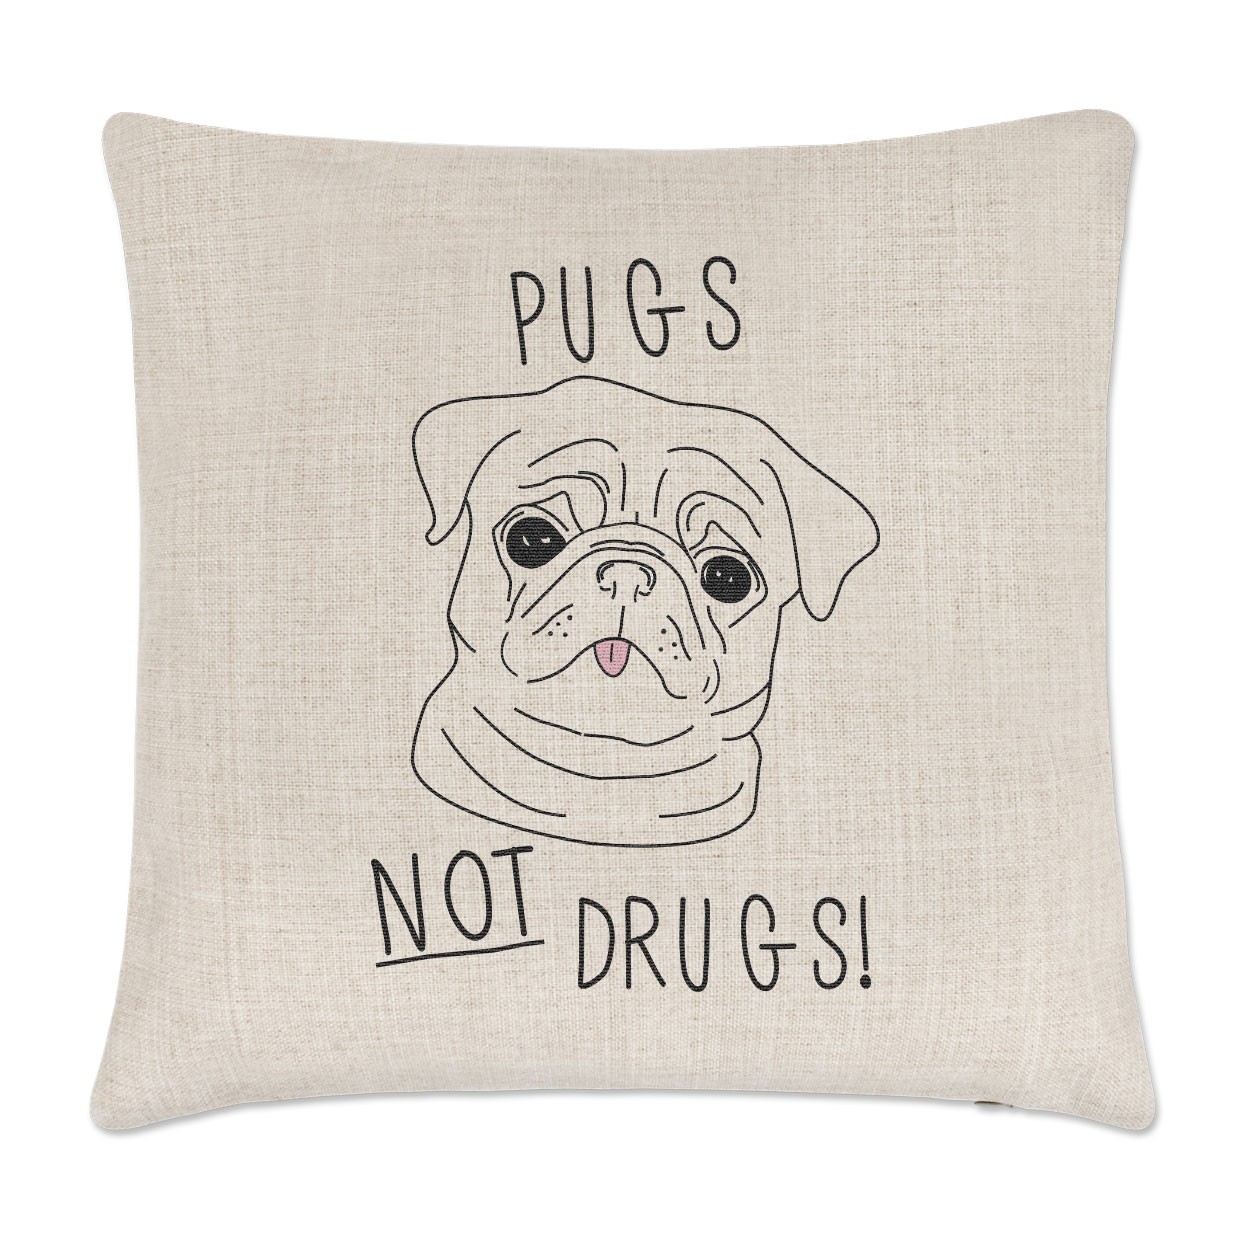 Pugs Not Drugs Linen Cushion Cover